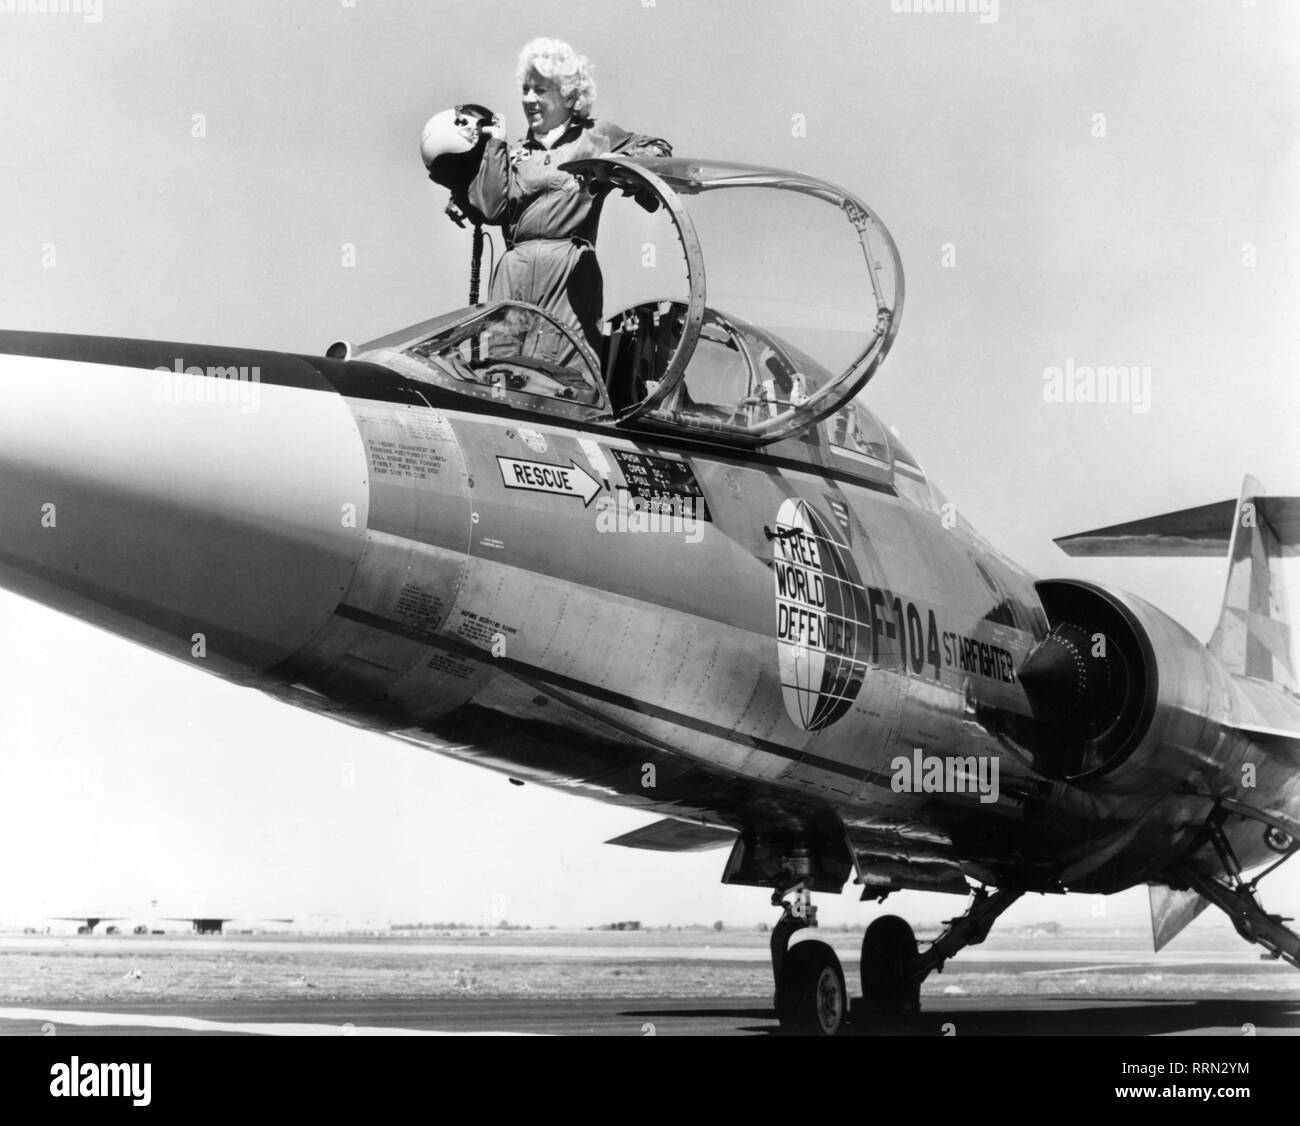 Cochran, Jacqueline 'Jackie', 11.5.1906 - 9.8.1980, American aviatrix, half length, in her Lockheed TF-104 G Starfighter after her record flight, Edwards Air Force Base, California, 2.5.1963, Additional-Rights-Clearance-Info-Not-Available Stock Photo